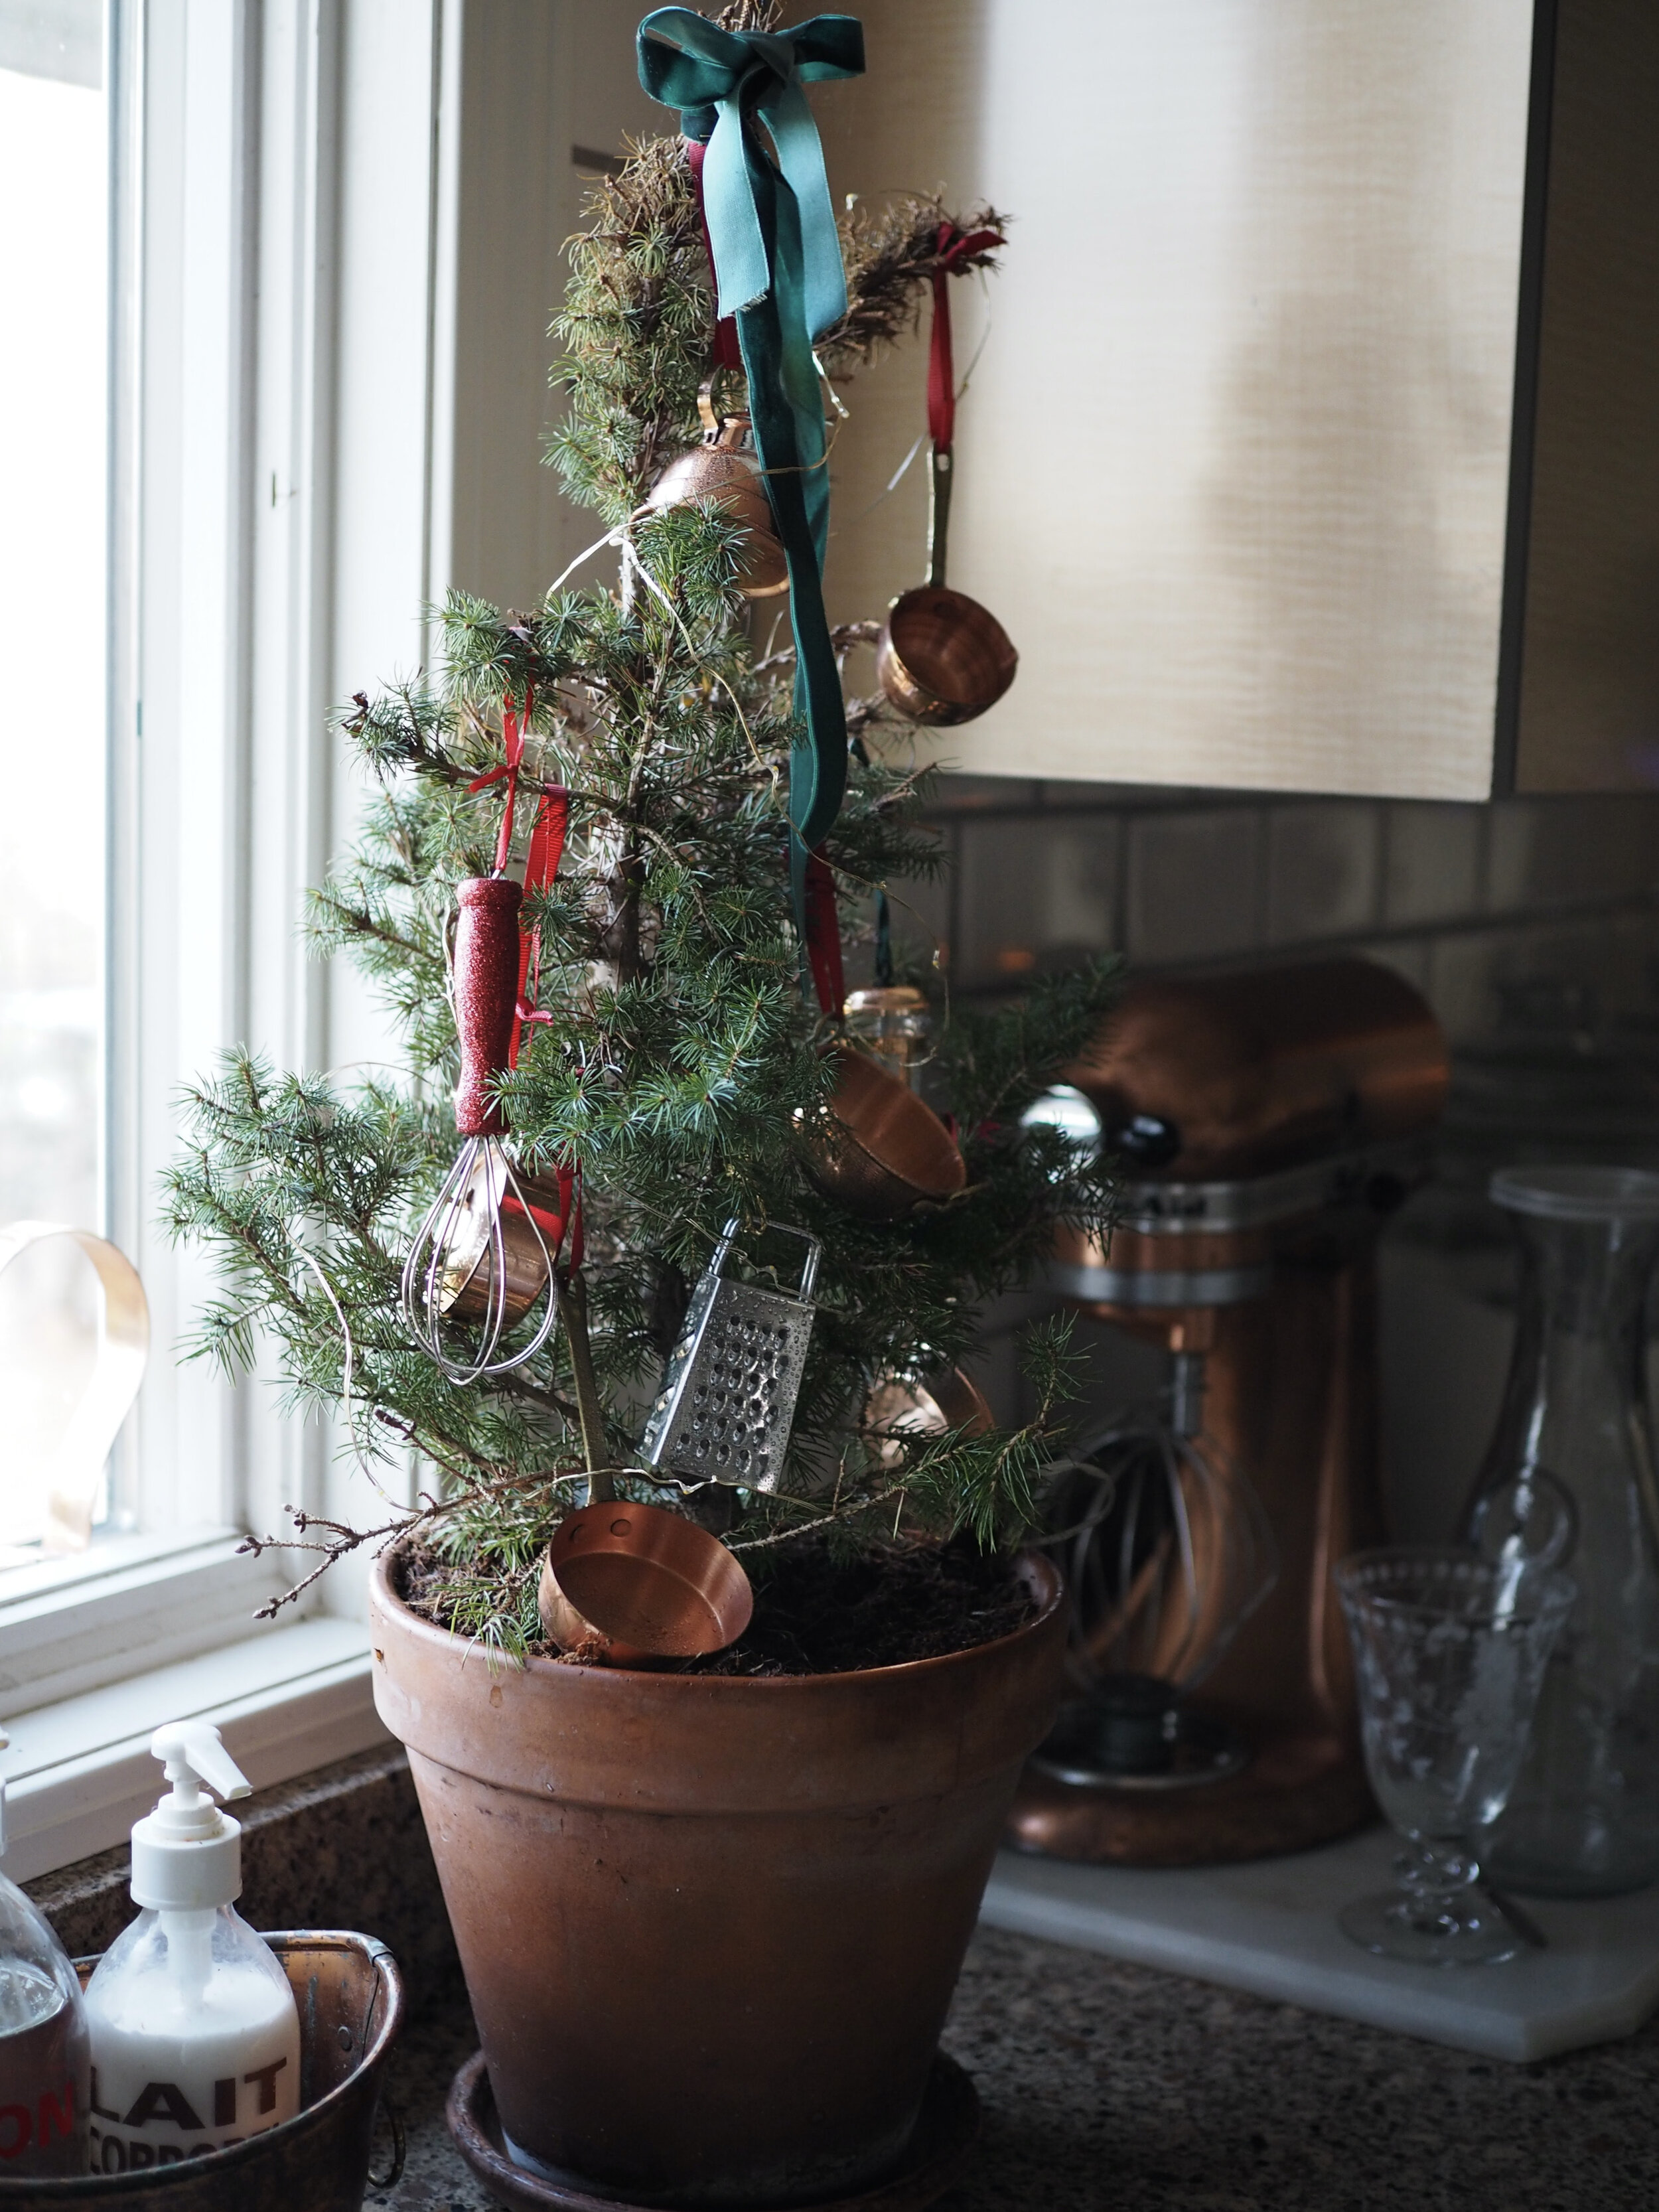 A mini potted Alberta spruce is dressed up with my collection of mini copper cookware in the kitchen